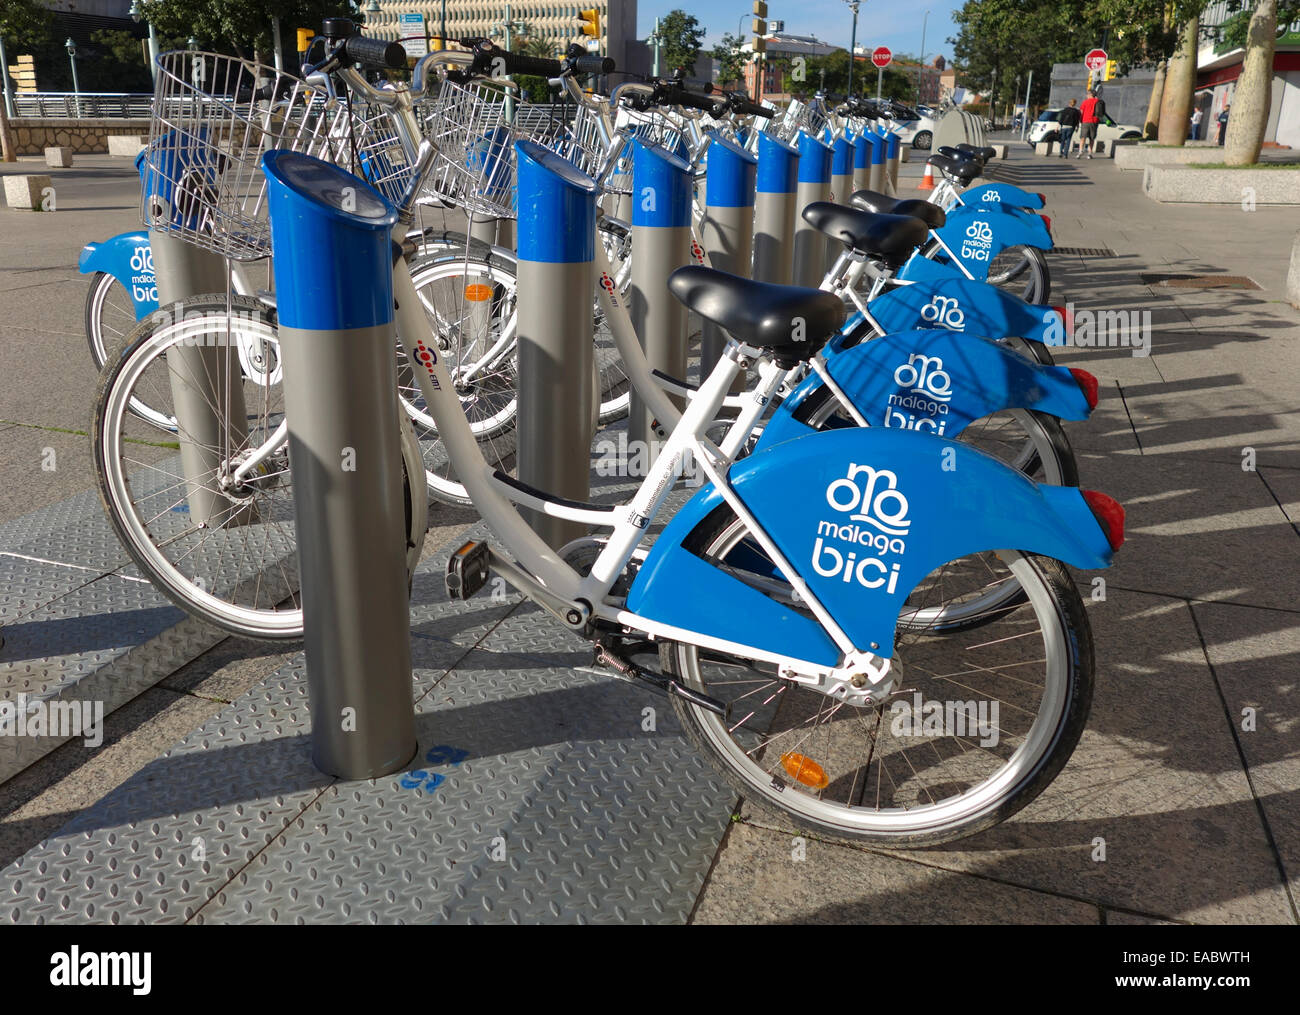 Malaga spain, Row of blue Malaga Bici, public bicycles renting system station in Malaga, Andalusia, Spain. Stock Photo